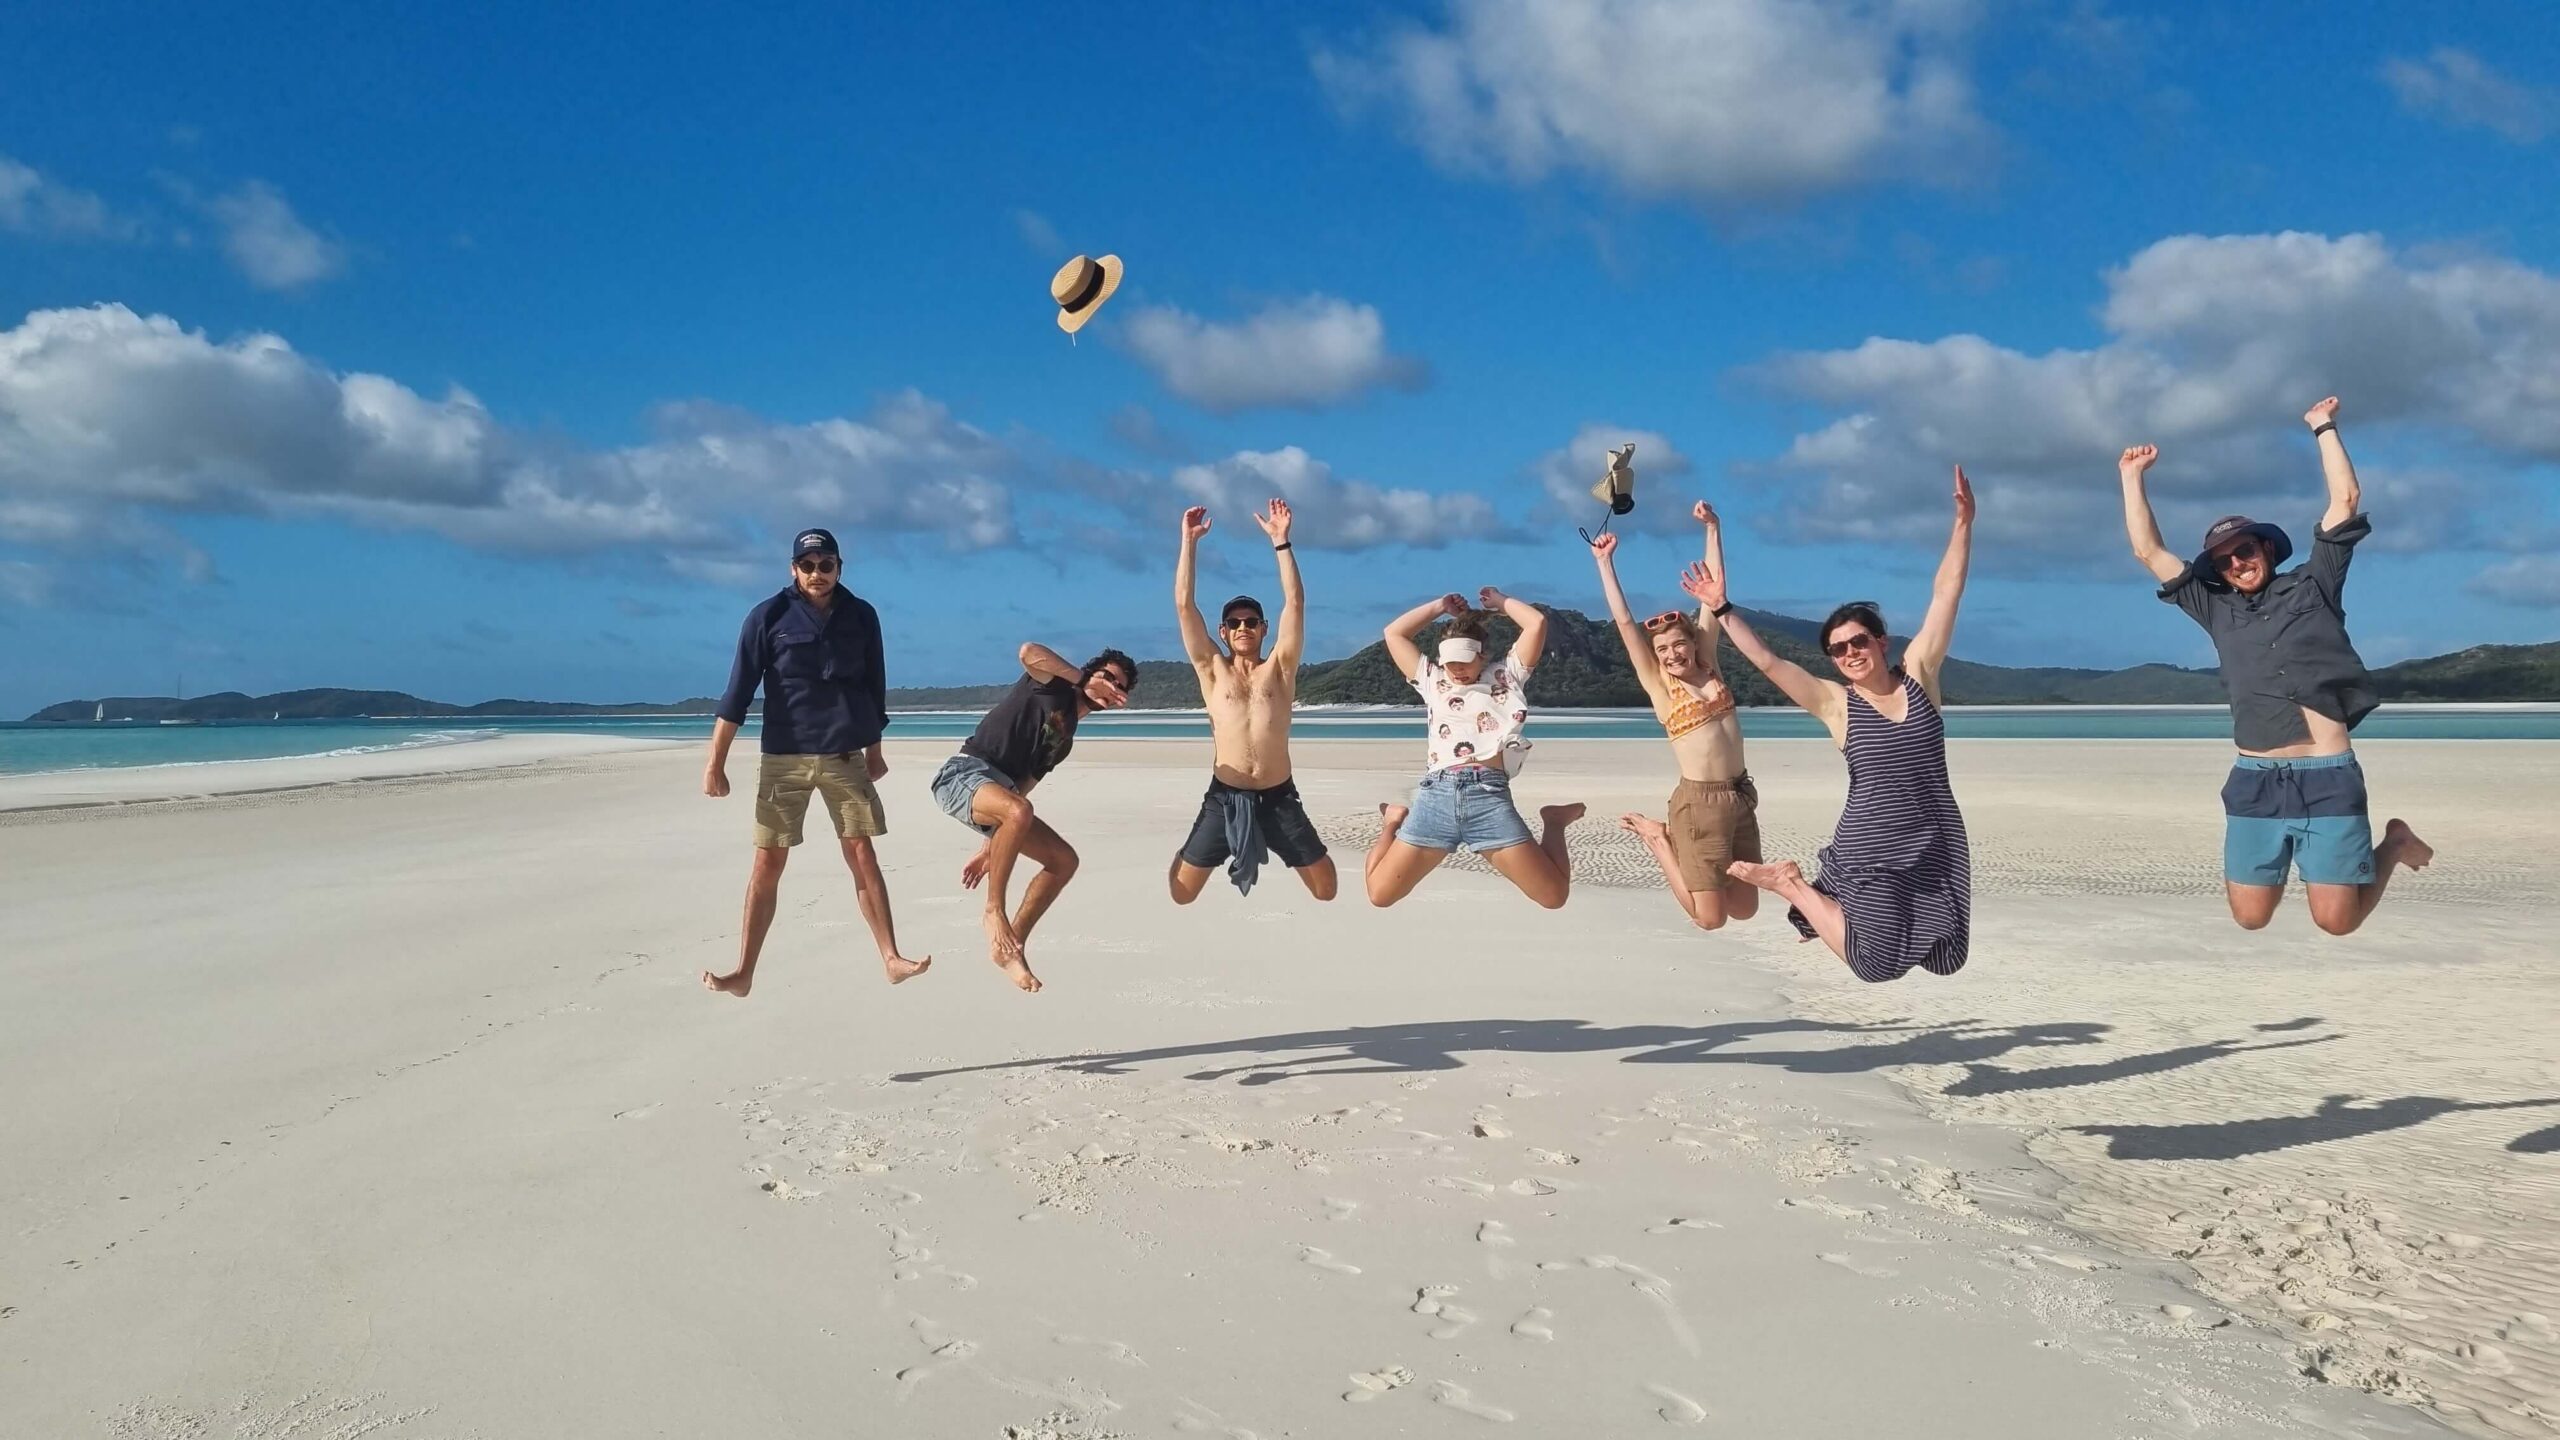 Nick, Jacques, Toby, Sophie, Lizzie, Alison and Sam on Whitehaven Beach, the Whitsundays.